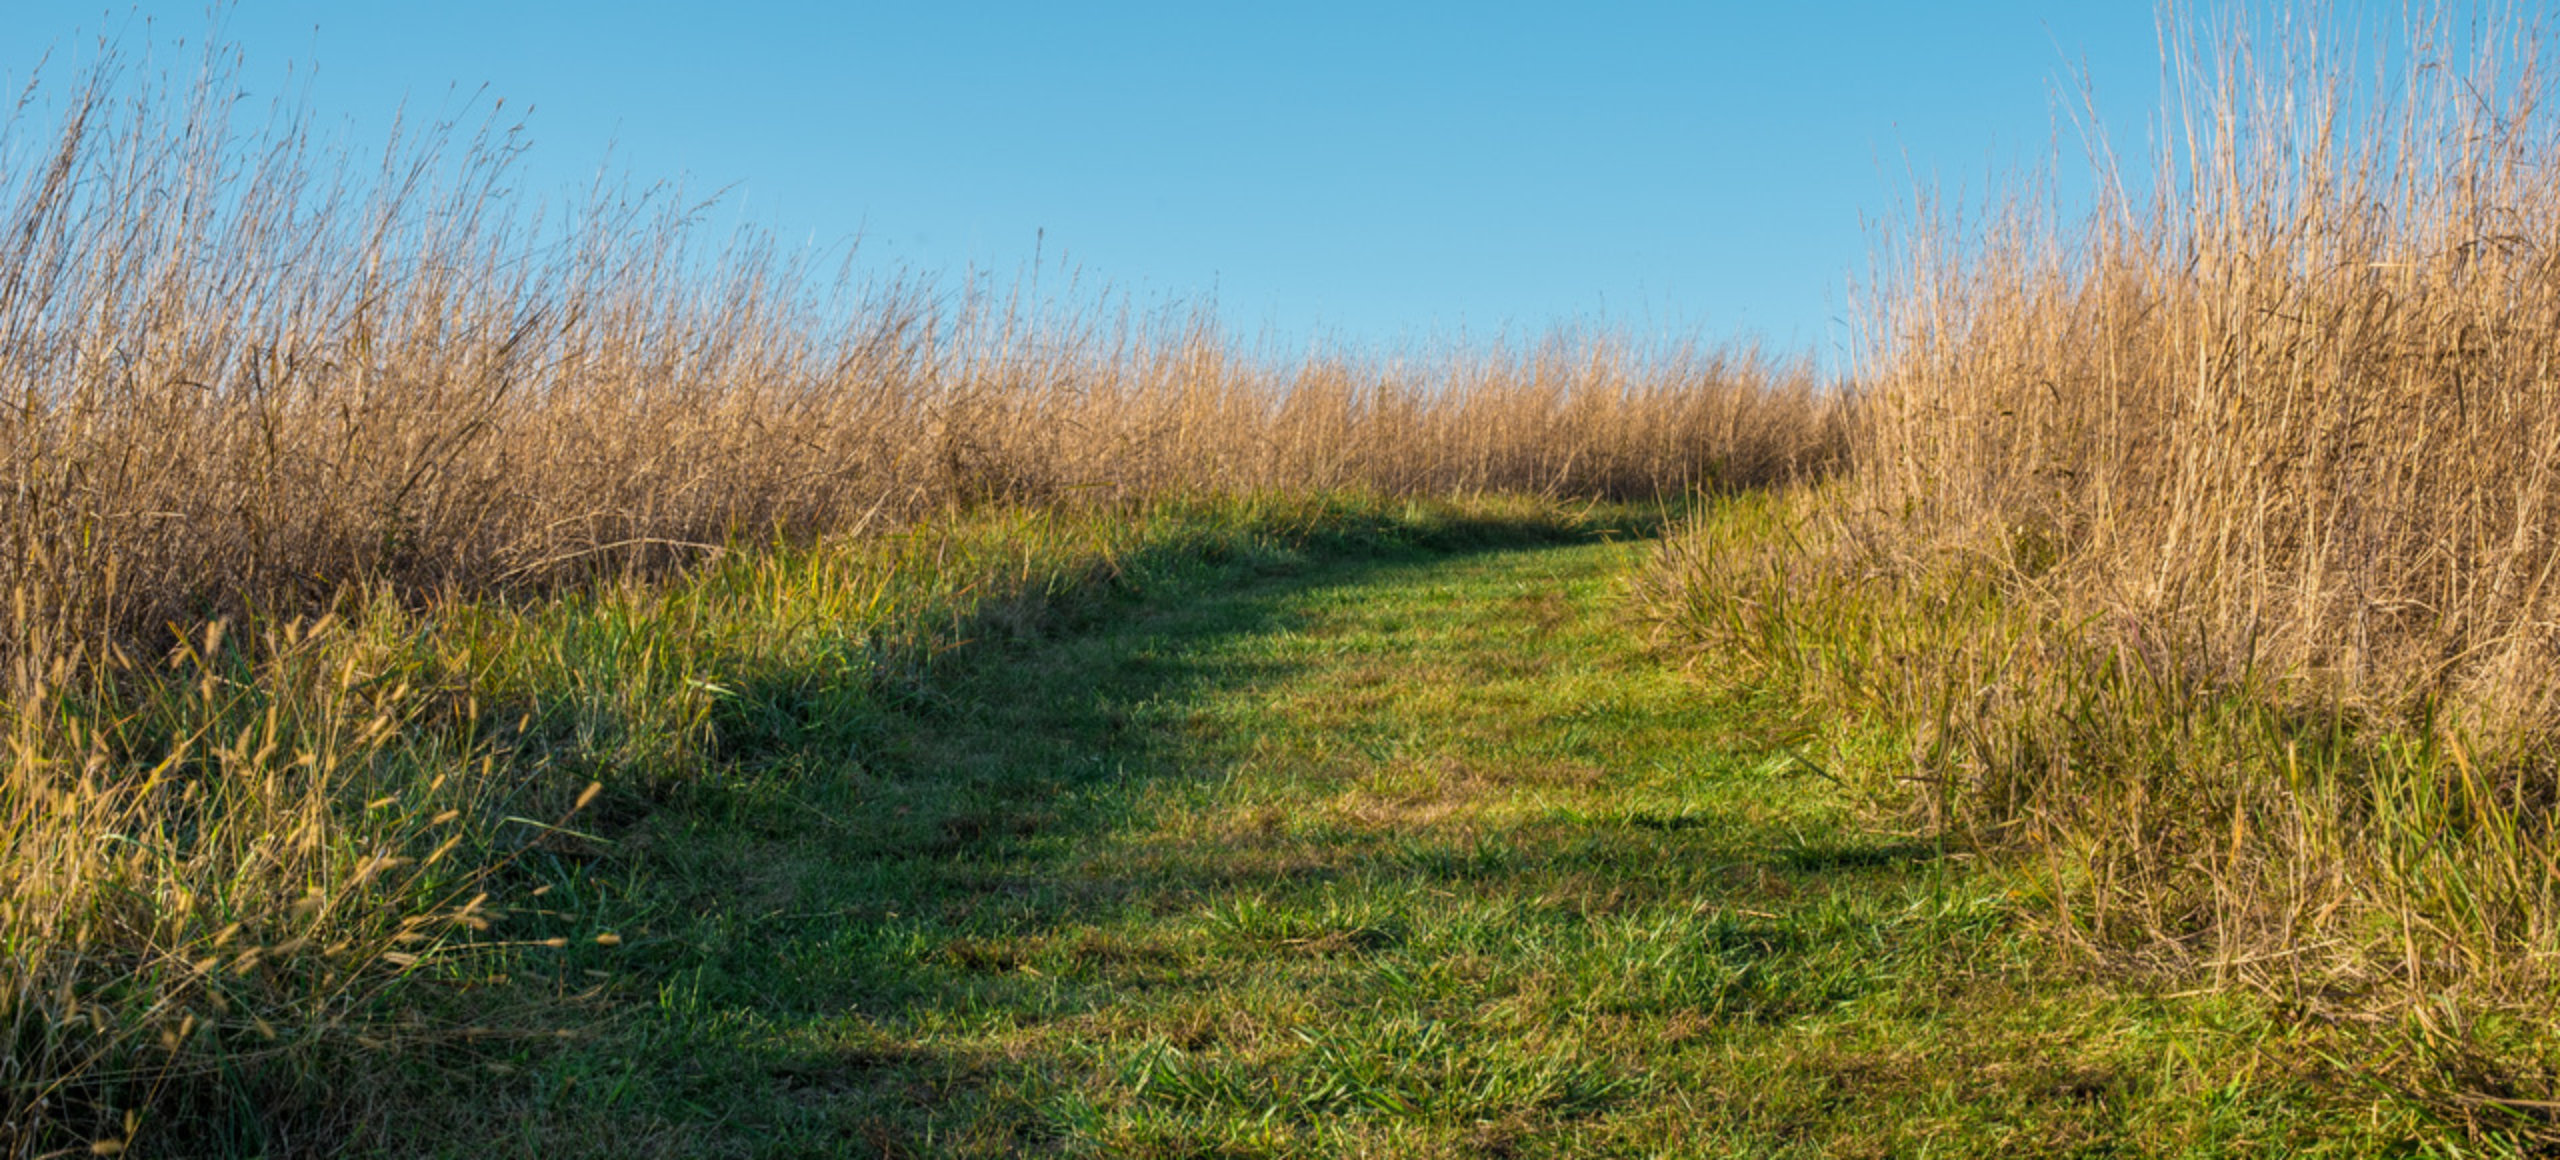 A green grassy trail with a slight incline cuts through a meadow of tall brown grass.